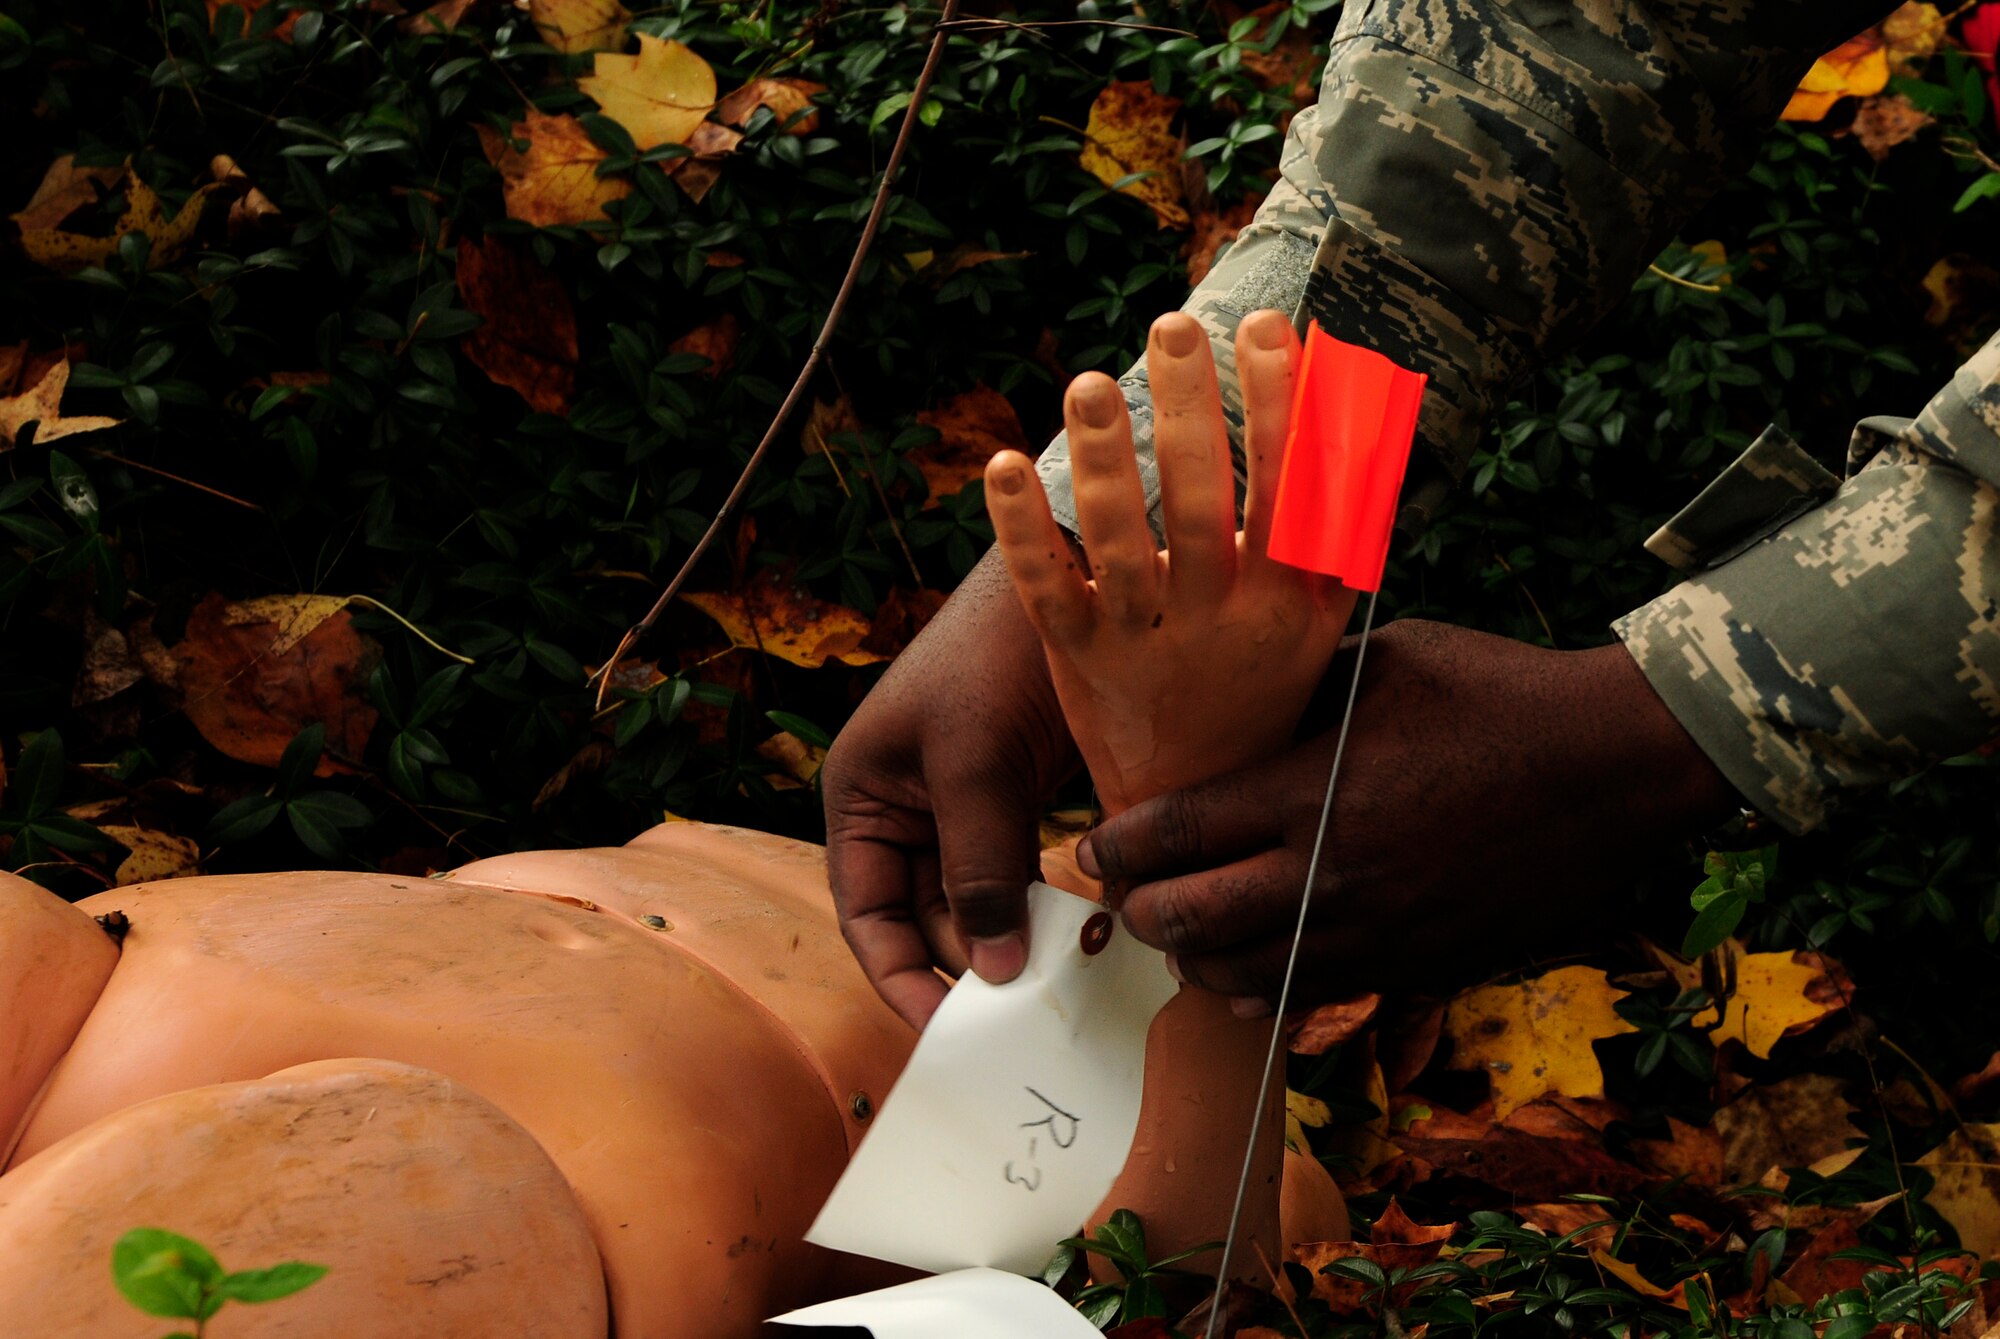 U.S. Air Force Tech. Sgt. Travis McDowell, 145th Force Support Squadron, tags a mannequin representing human remains during an annual Anti-Terrorism Exercise simulating a car-bomb detonation inside the perimeter of the North Carolina Air National Guard Base, Charlotte Douglas Intl. Airport, Nov. 1, 2014. The exercise initiated force protection measures across the base, testing the Wing’s ability to respond accordingly. After the car-bomb detonation, Airmen also performed simulated recovery procedures until conclusion of the exercise. (U.S. Air National Guard photo by Staff Sgt. Julianne M. Showalter, 145th Public Affairs/Released)